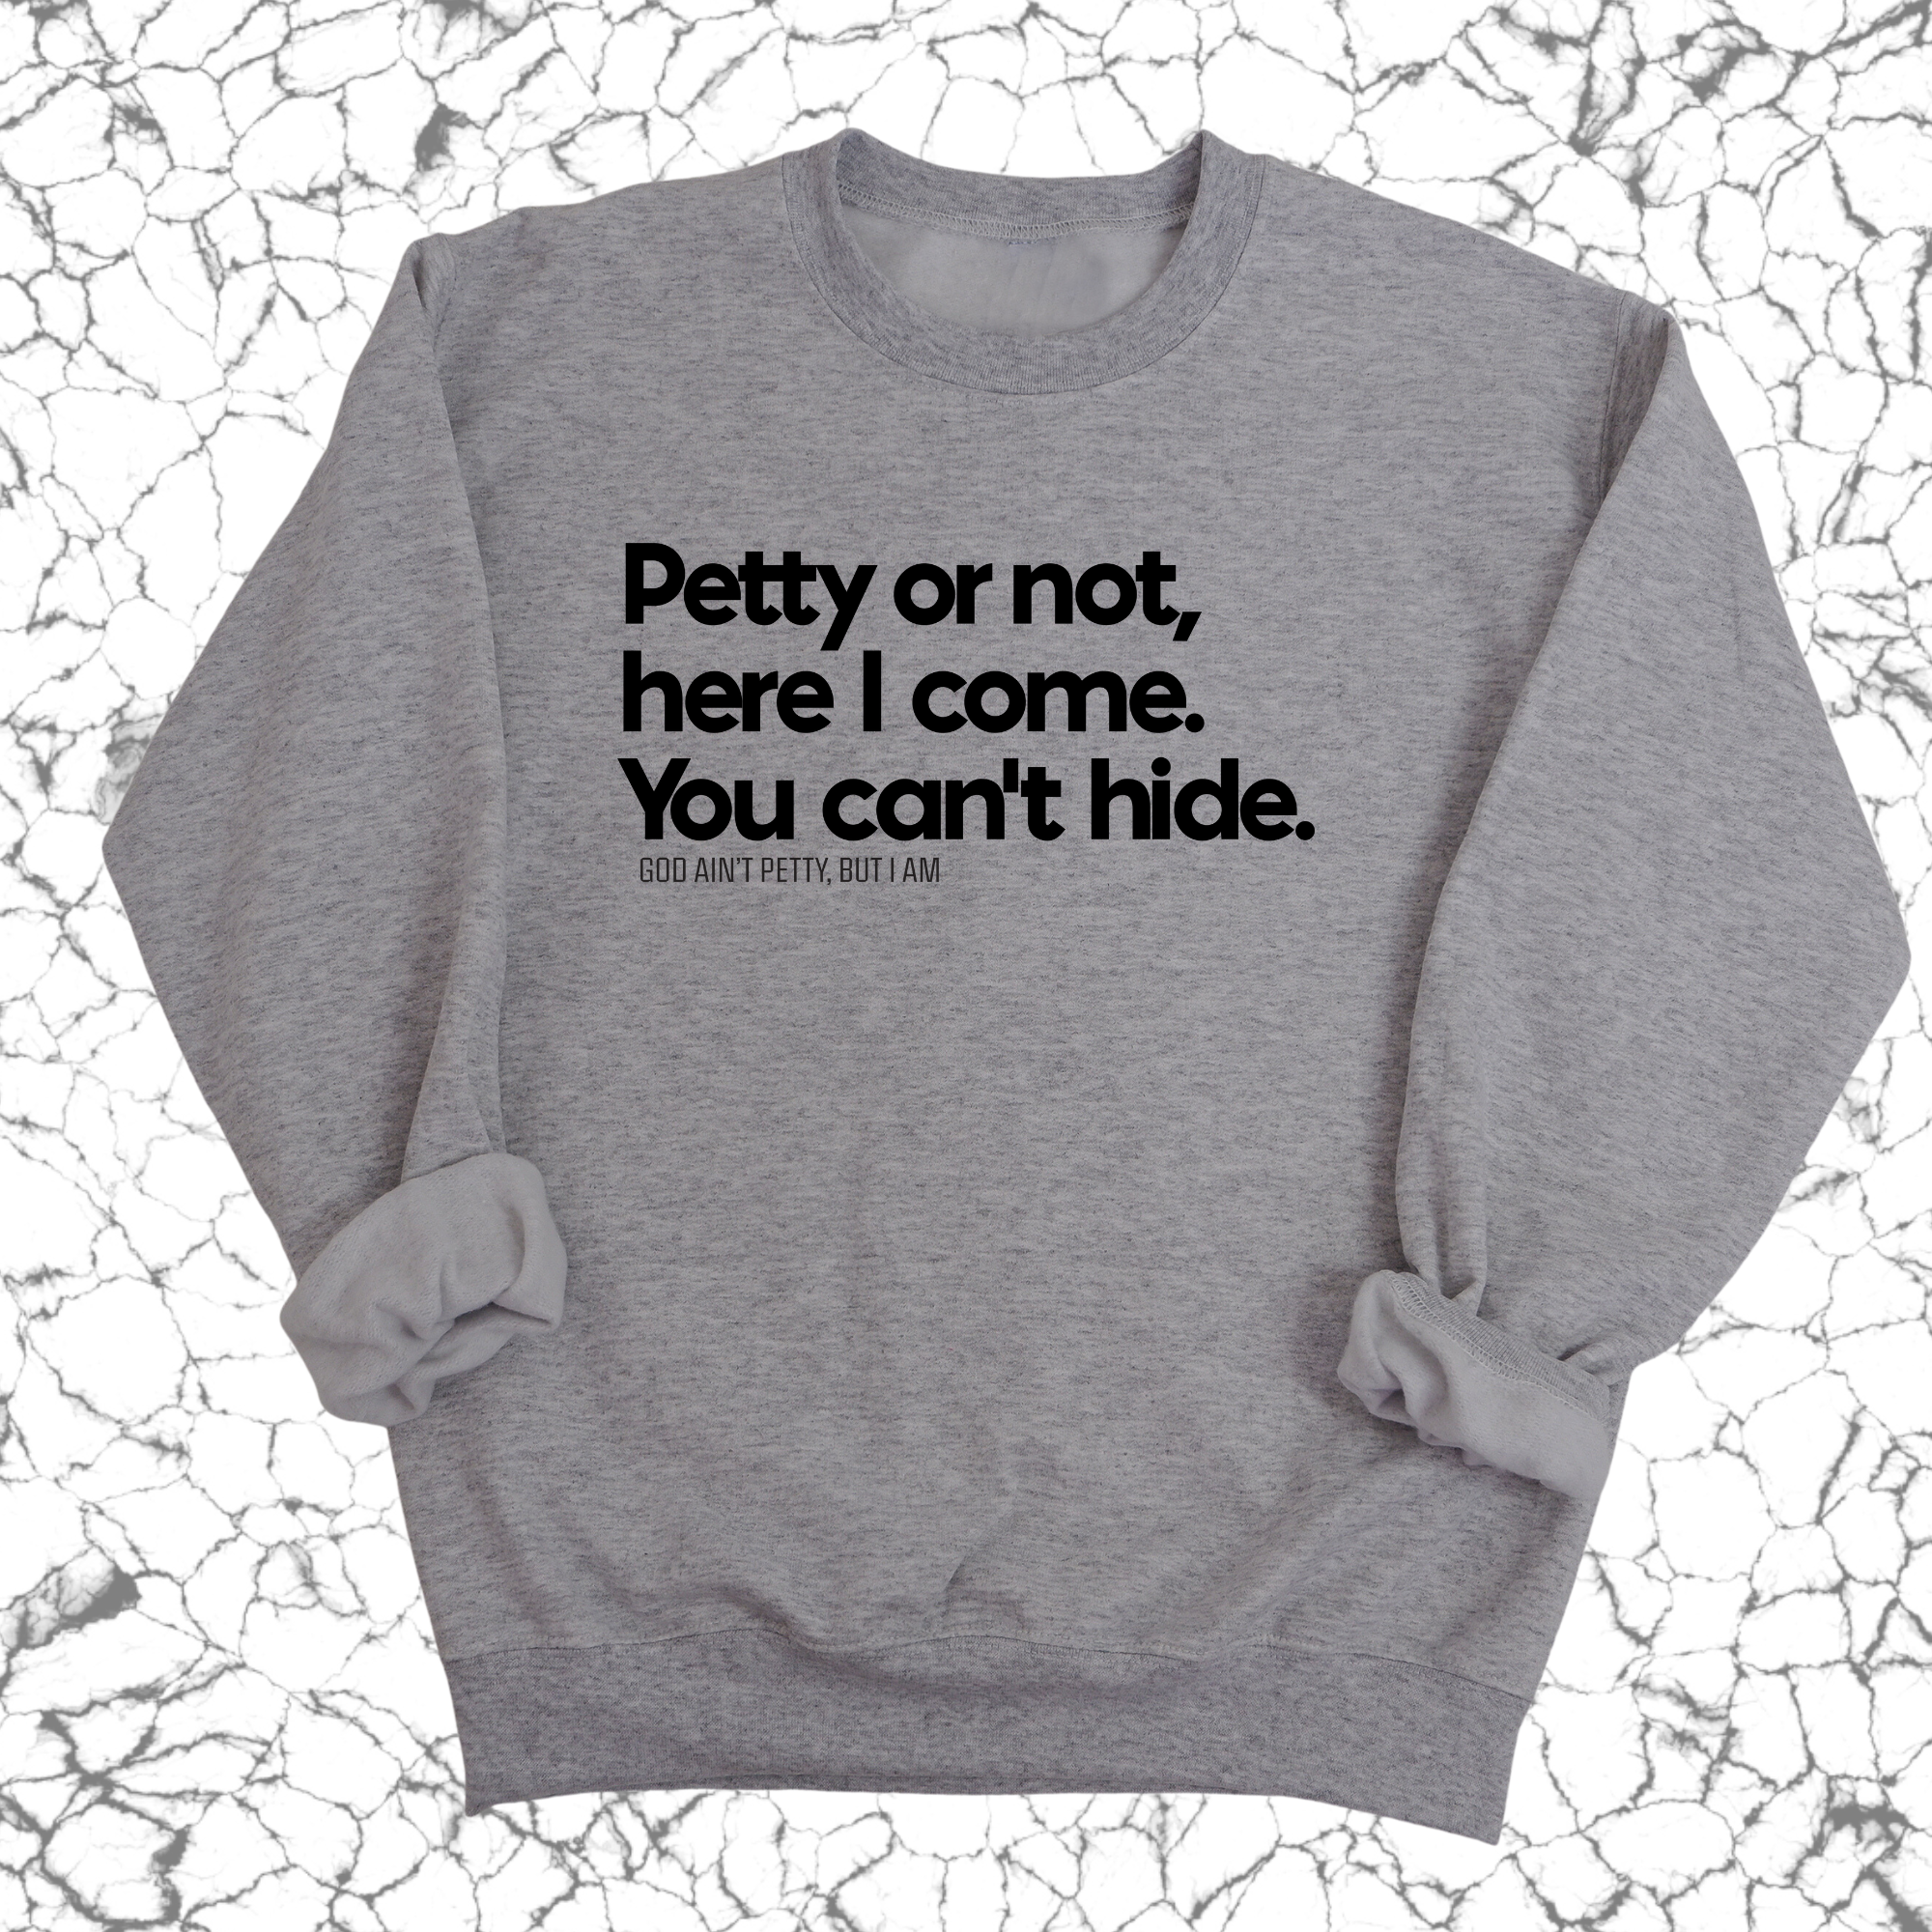 Petty or not here I come. You can't hide Unisex Sweatshirt-Sweatshirt-The Original God Ain't Petty But I Am